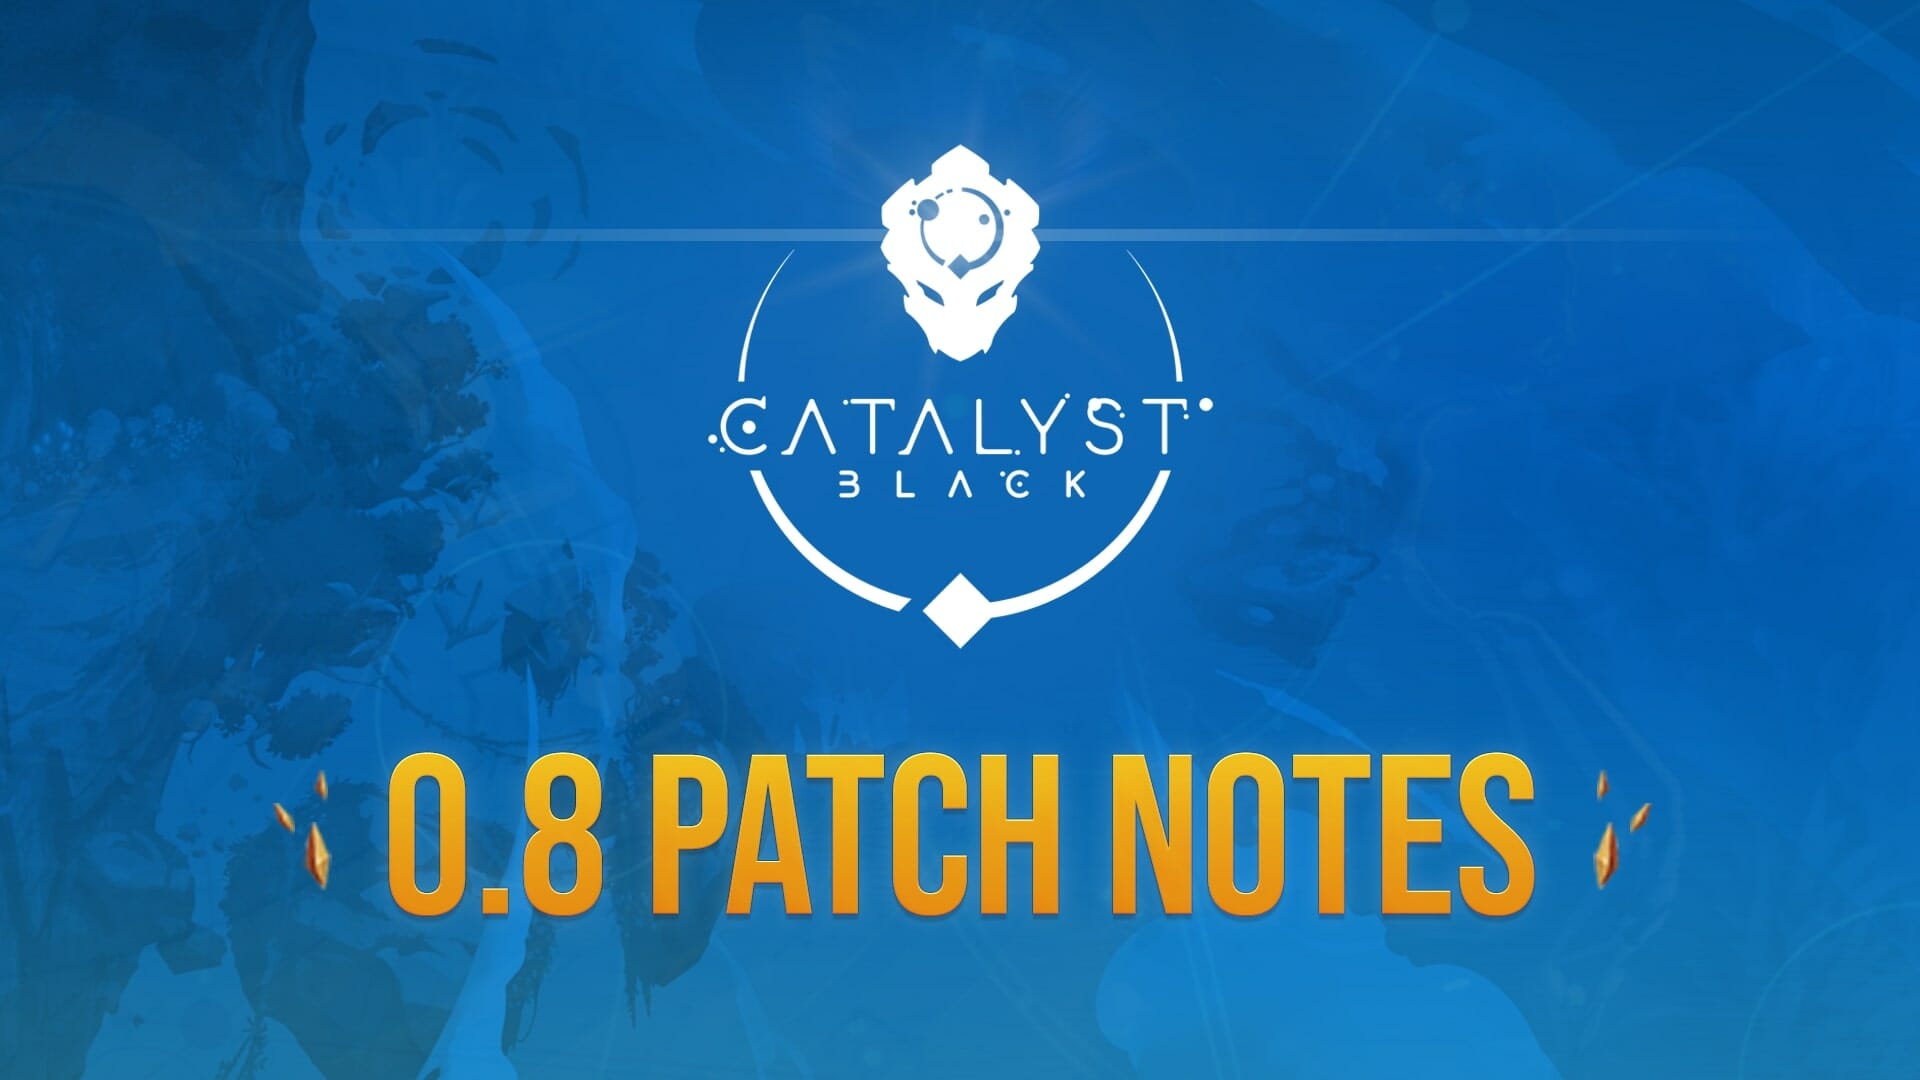 Catalyst Black 0.8 patch notes